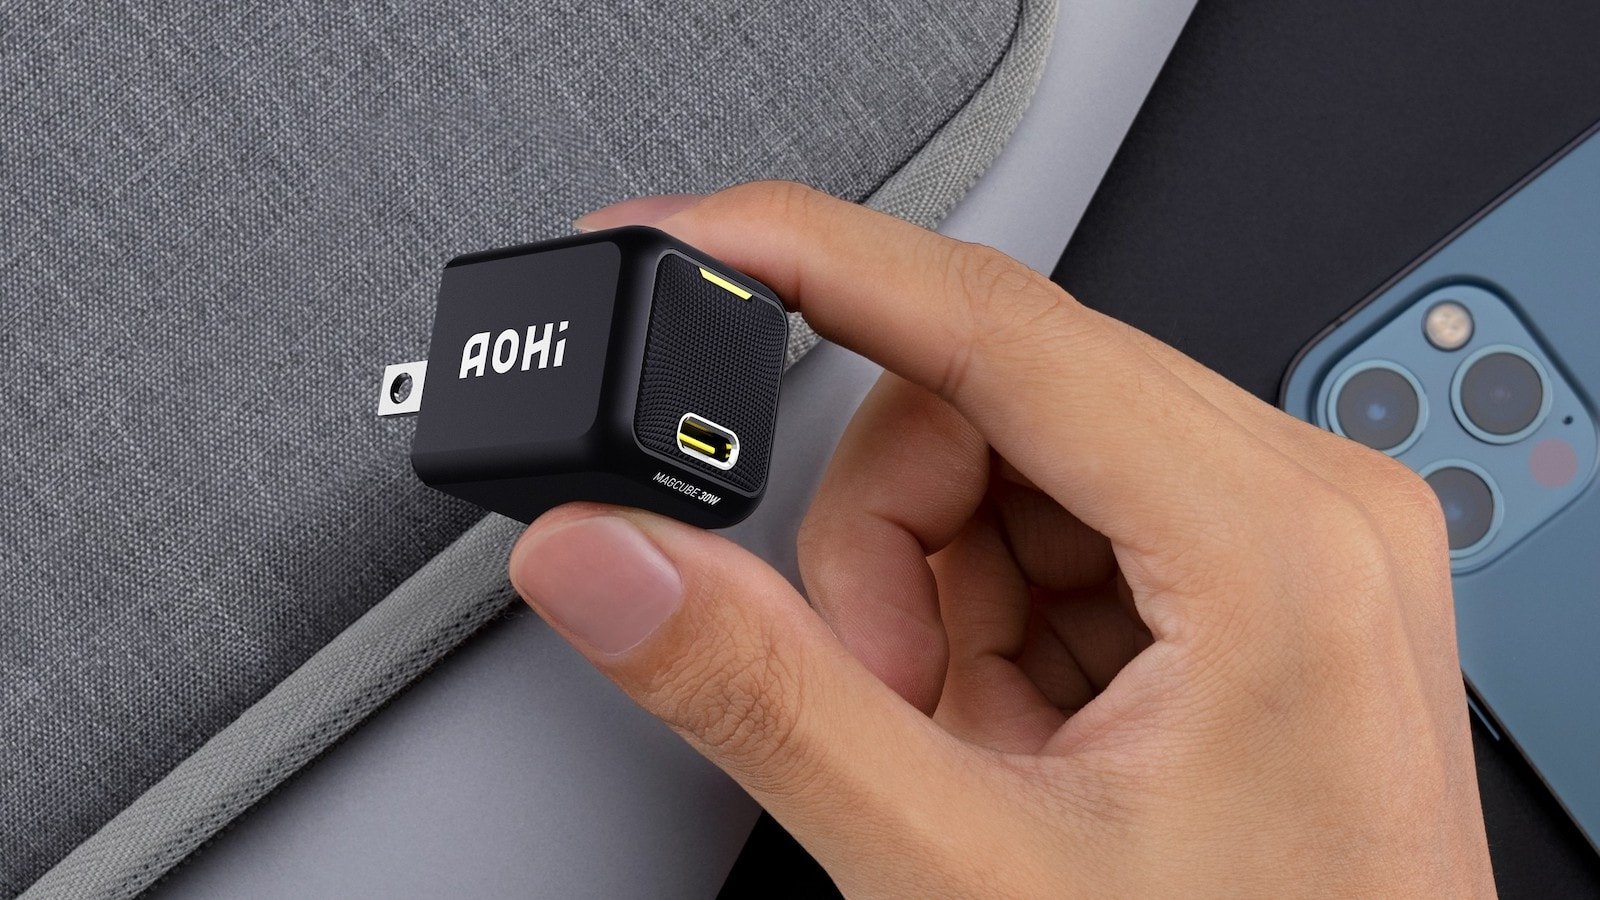 AOHI Magcube 30W PD Mini Charger rapidly powers USB-C gadgets up to 3 times faster